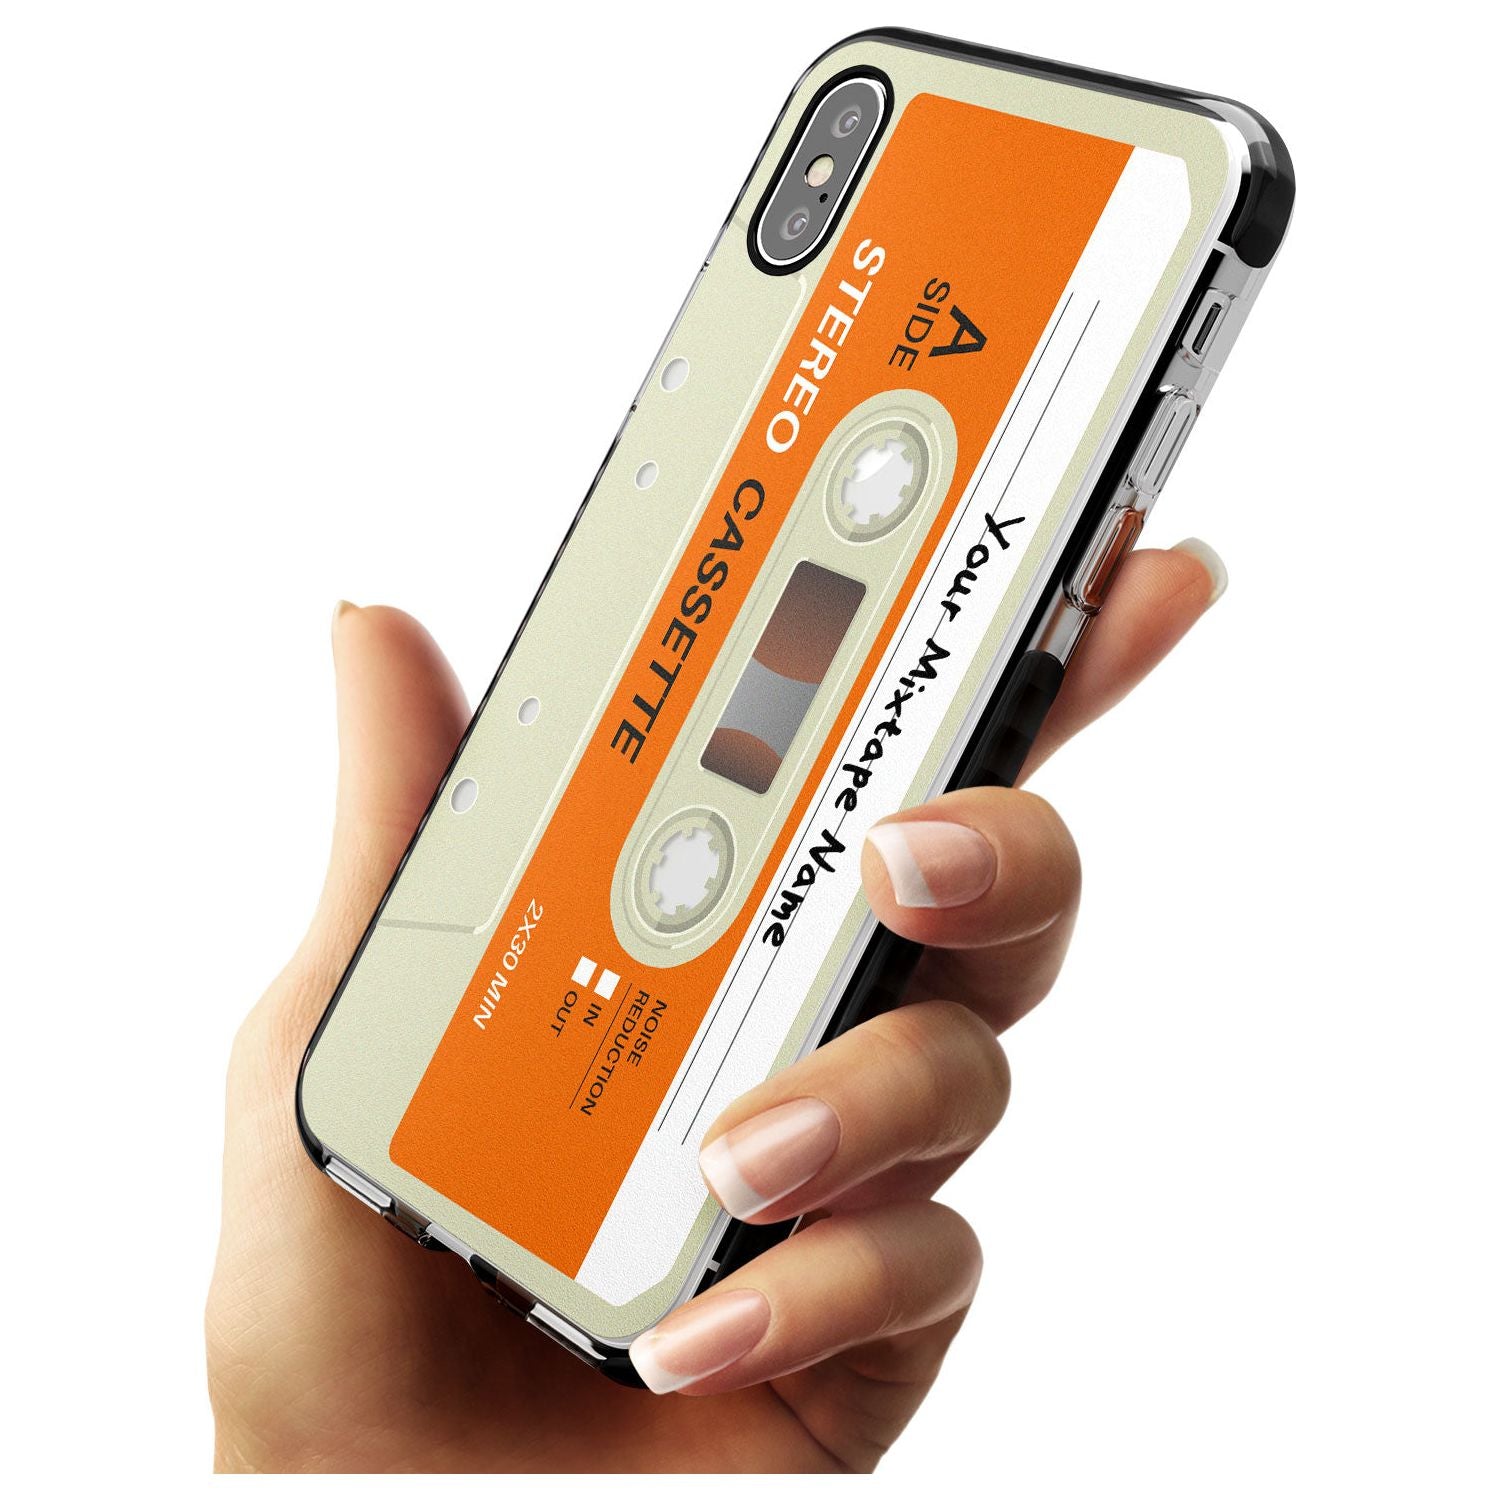 Classic Cassette Pink Fade Impact Phone Case for iPhone X XS Max XR